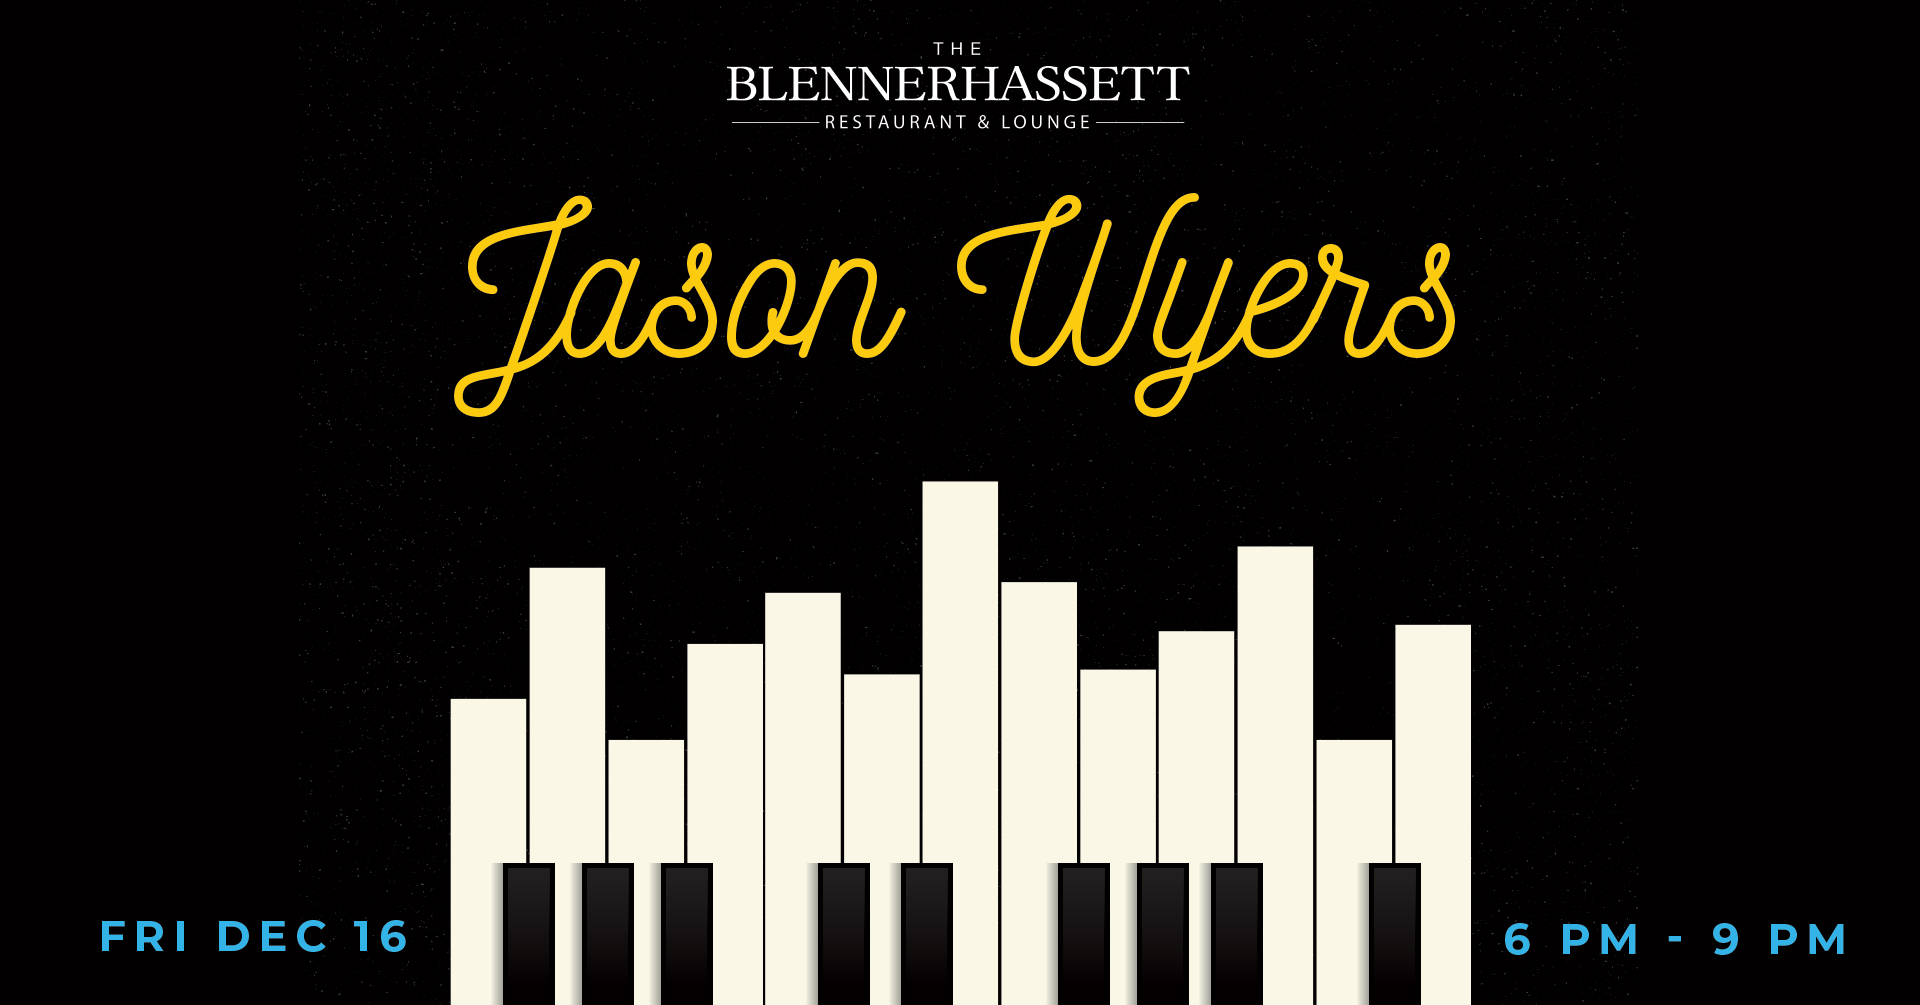 Jason Wyers plays piano during dinner on Friday, December 16th